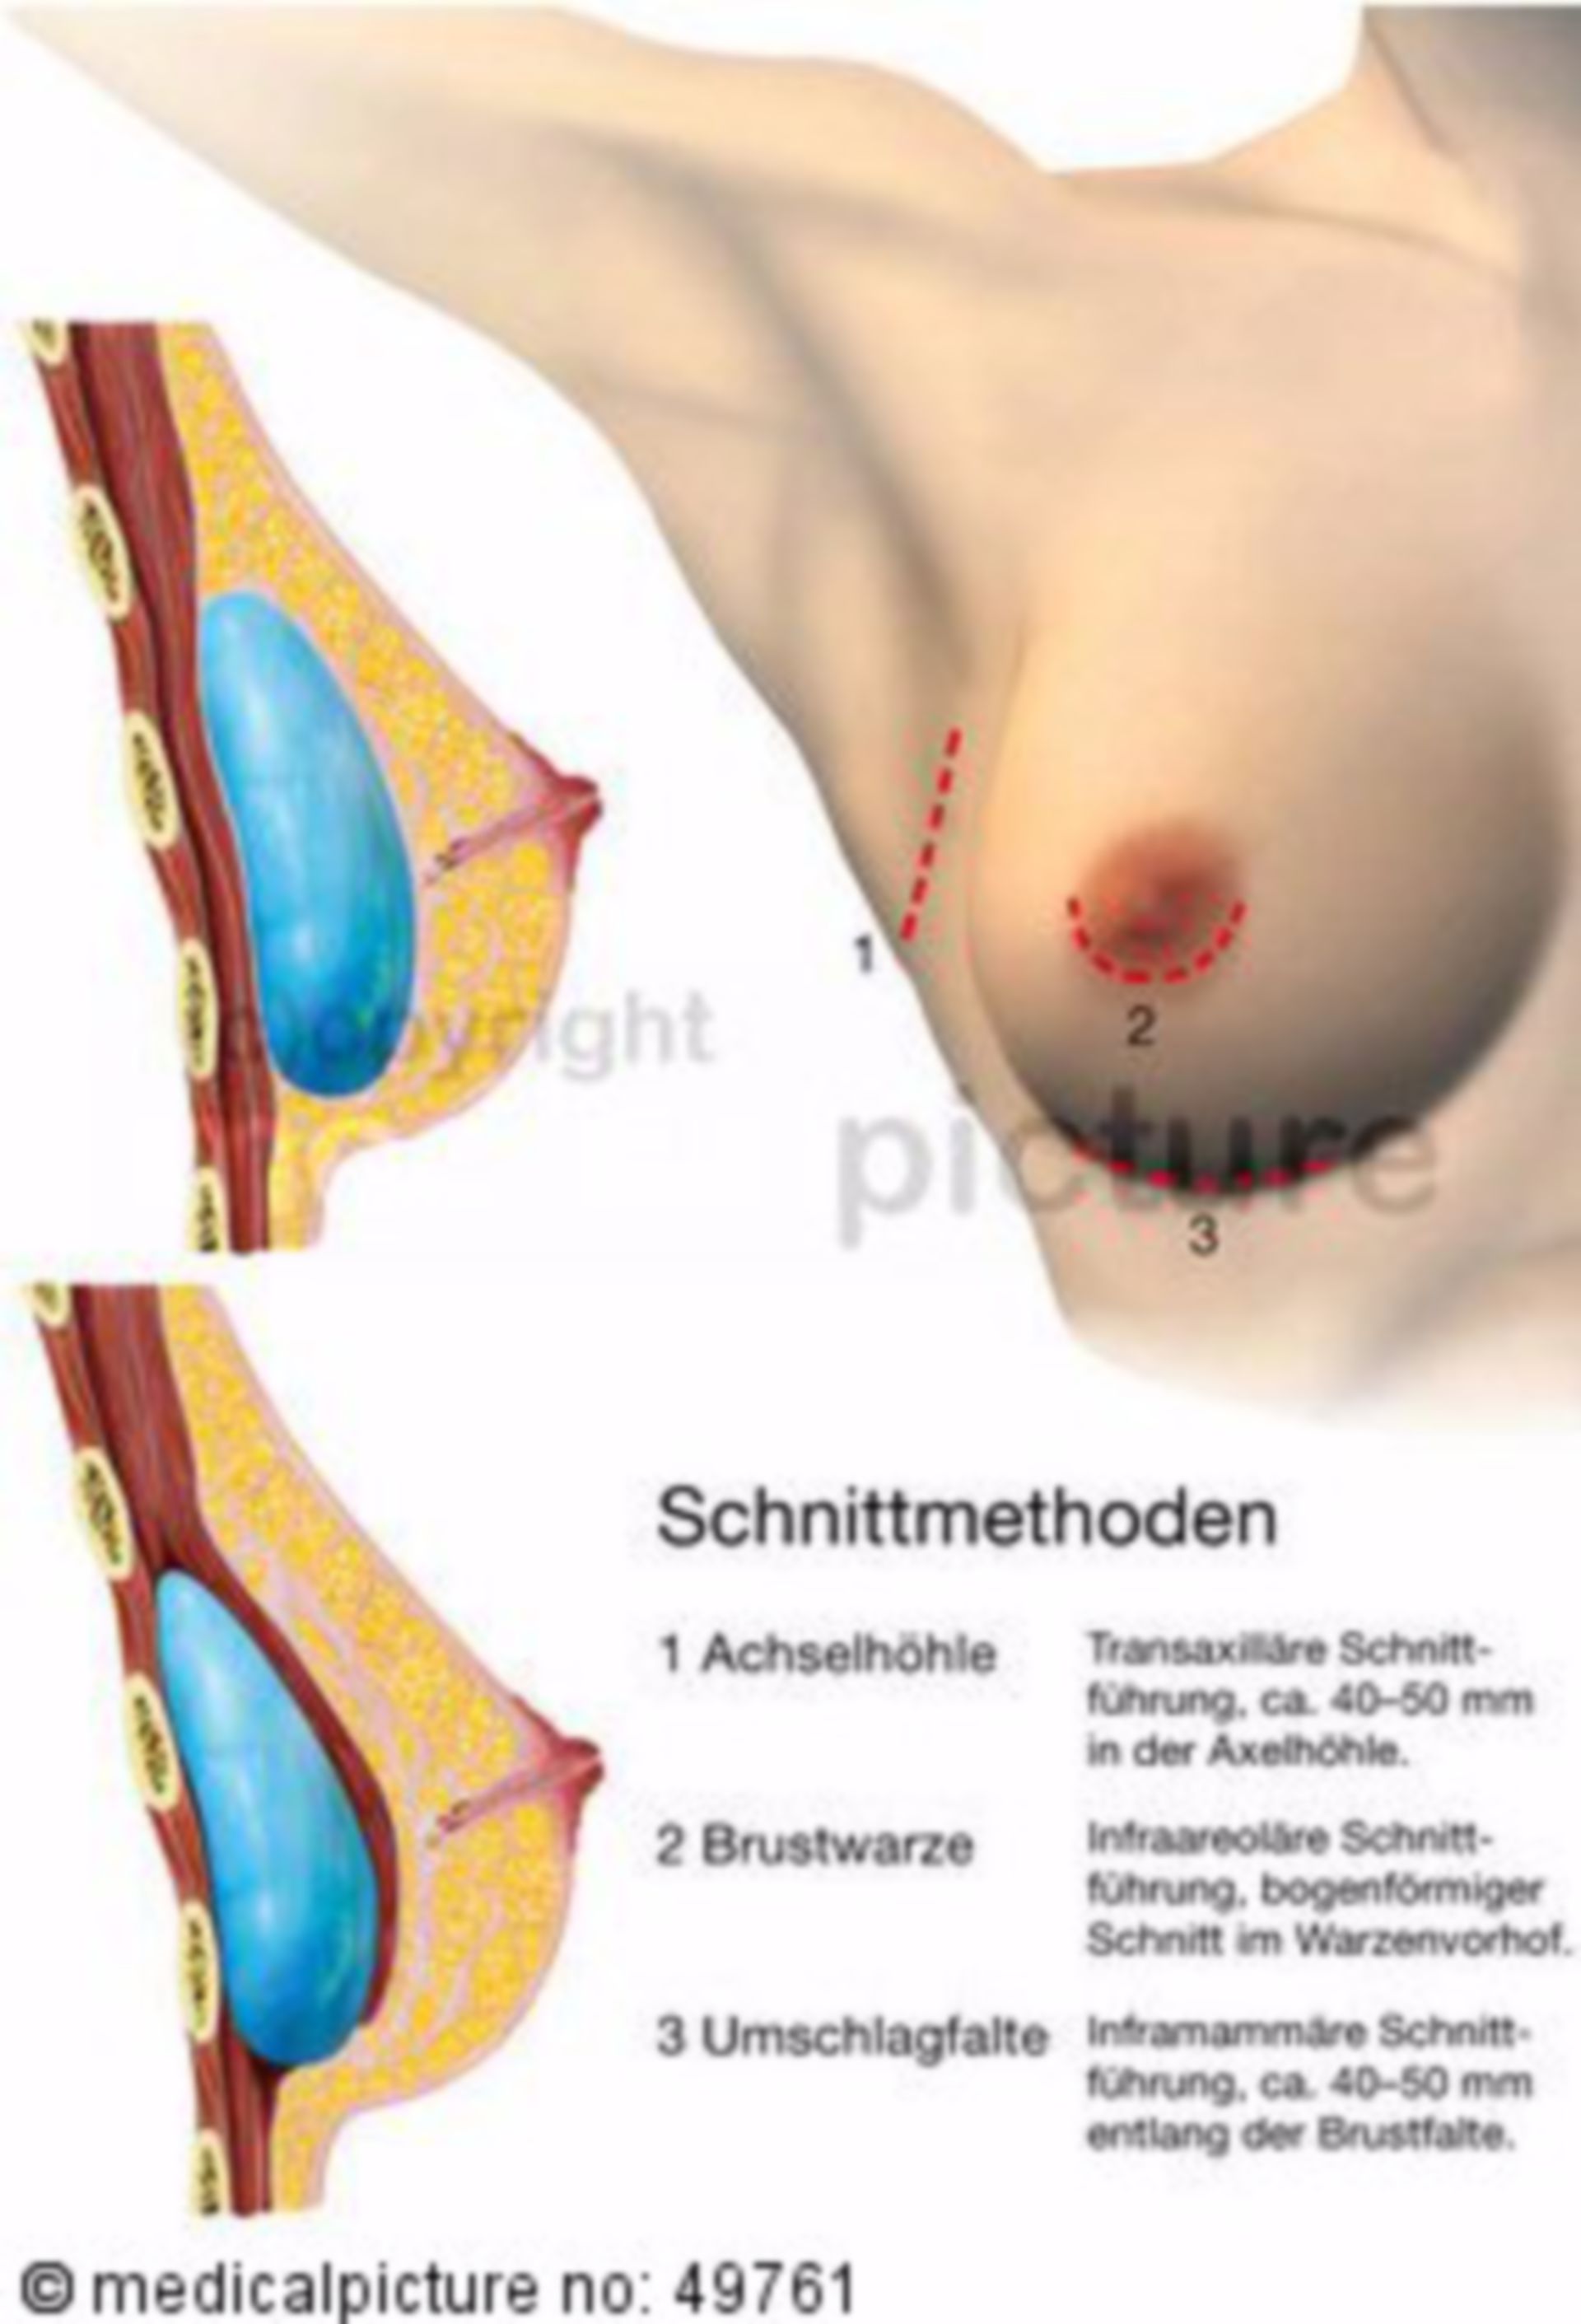 Breast implant/augmentation - Incisions